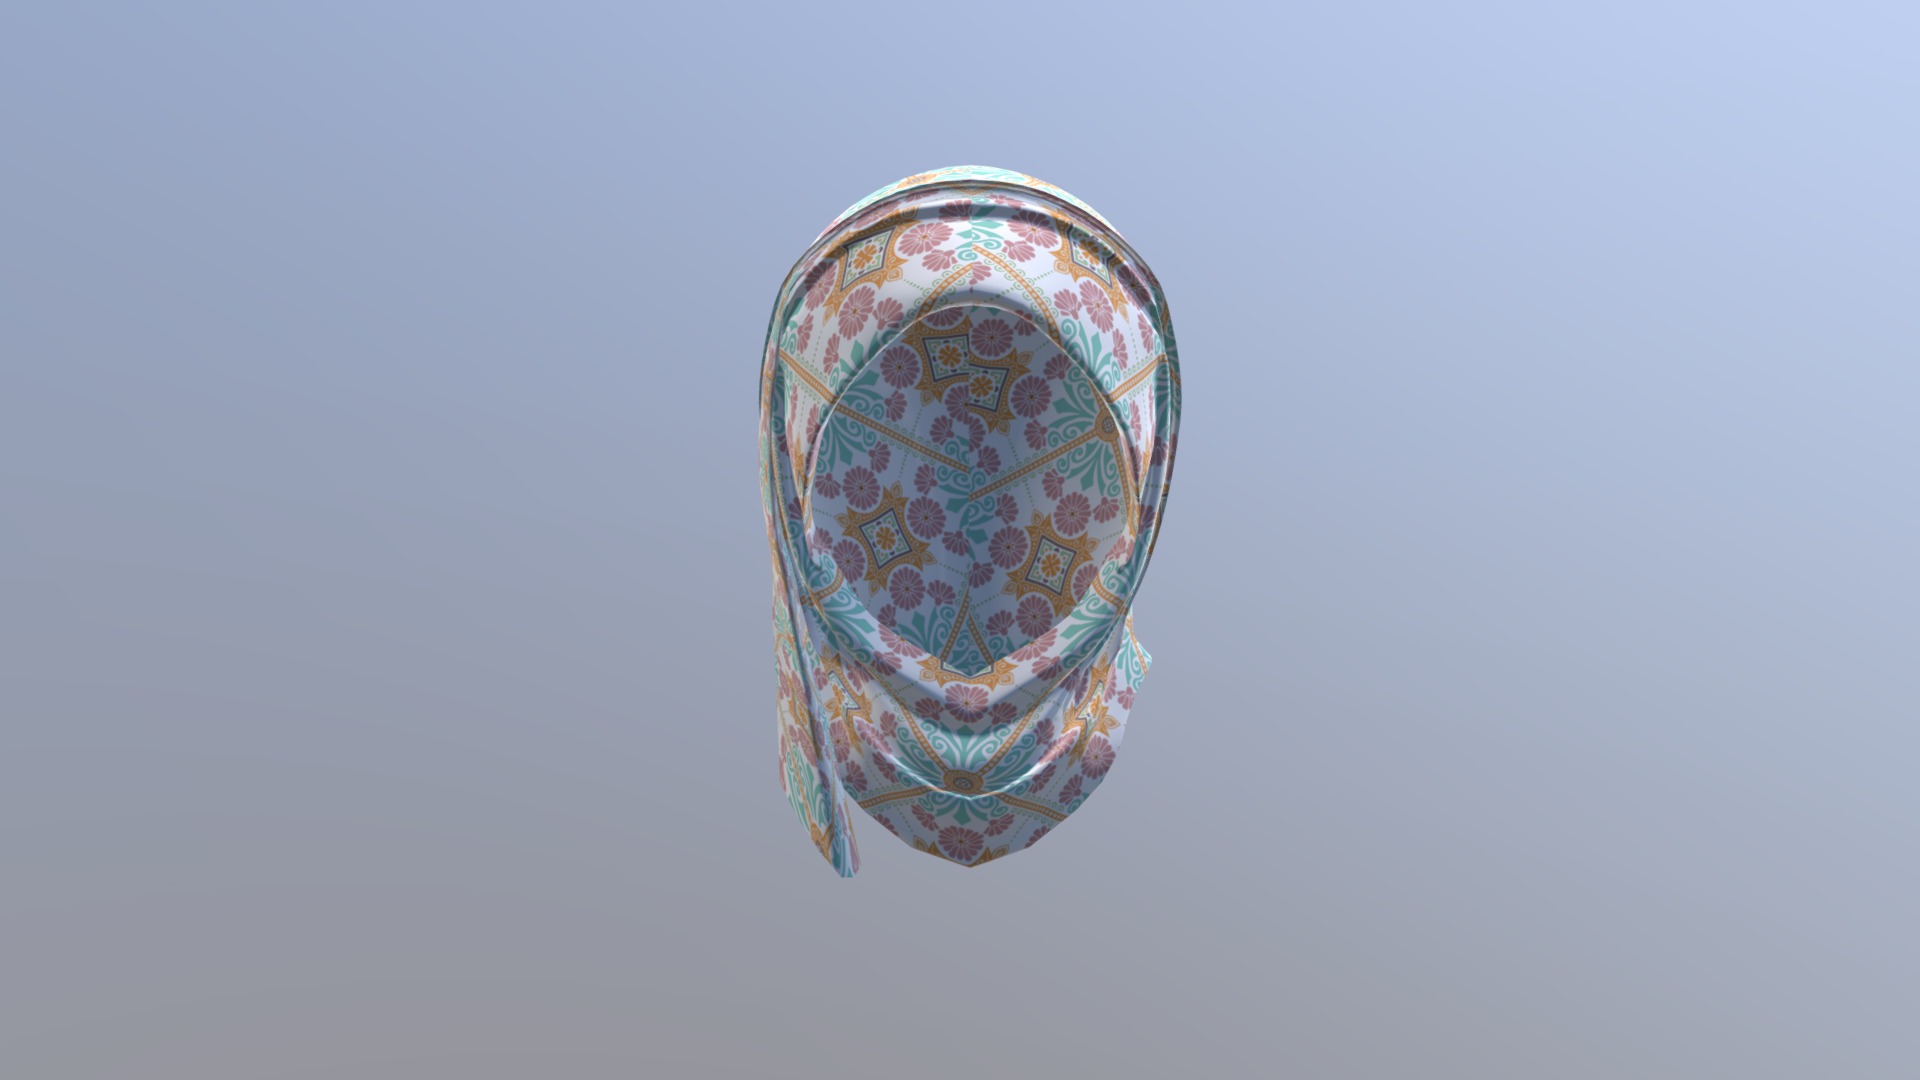 3D model Hijab Model 2 - This is a 3D model of the Hijab Model 2. The 3D model is about a colorful egg shaped object.